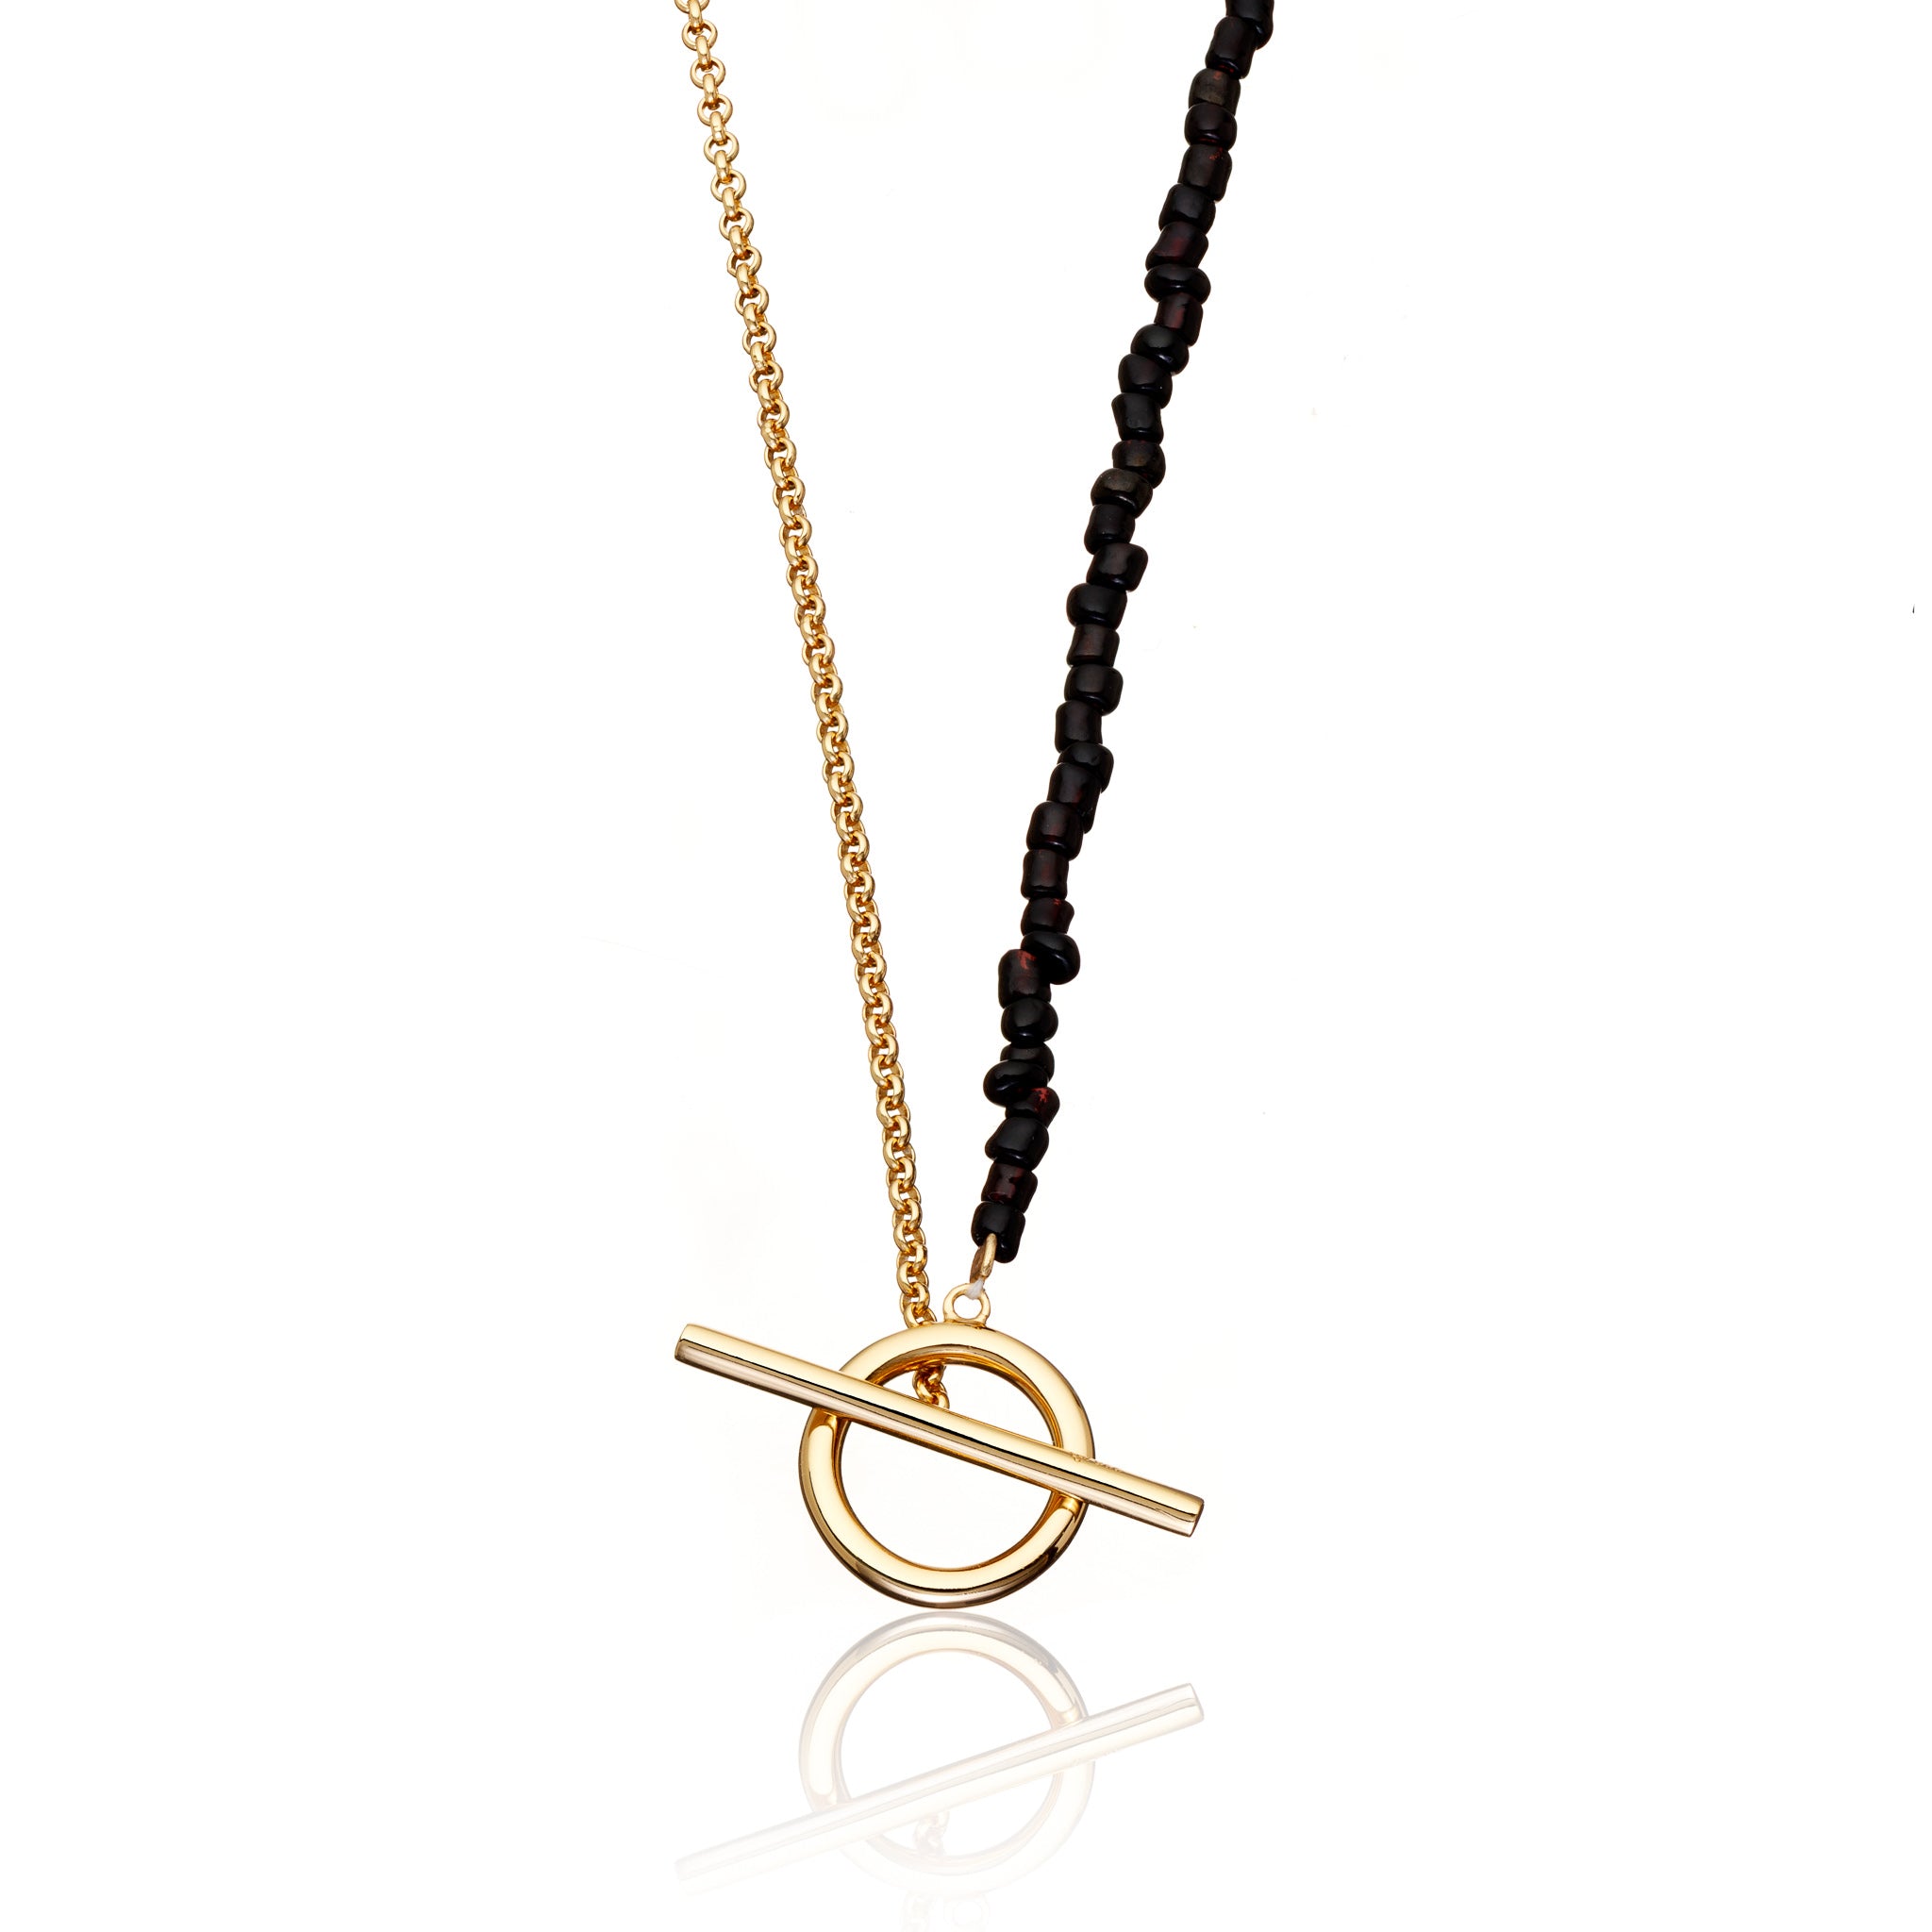 Black Bead and Chain T-Bar Necklace by Scream Pretty